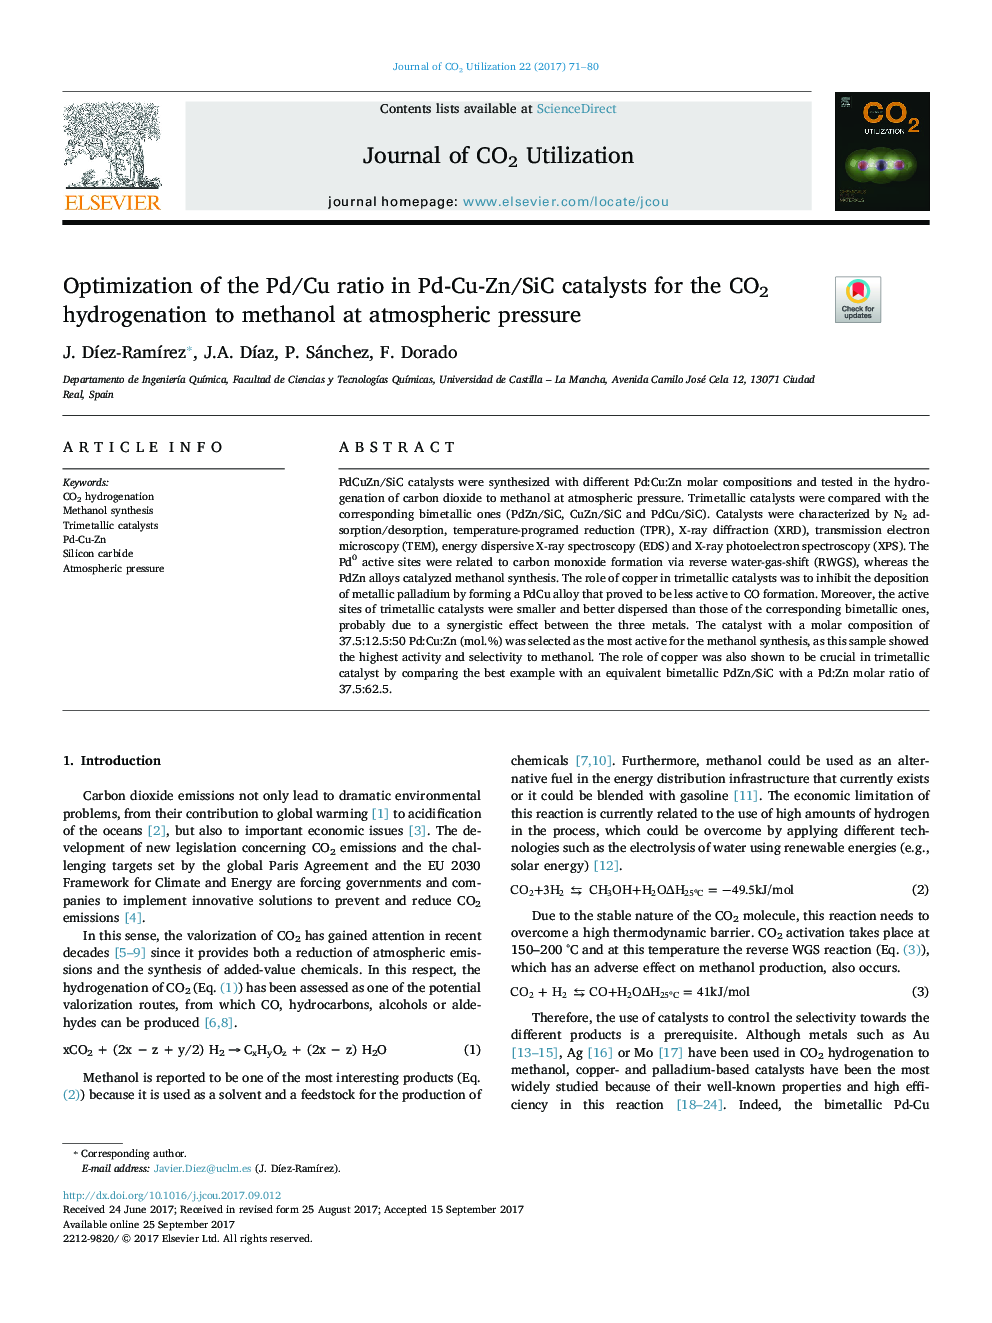 Optimization of the Pd/Cu ratio in Pd-Cu-Zn/SiC catalysts for the CO2 hydrogenation to methanol at atmospheric pressure